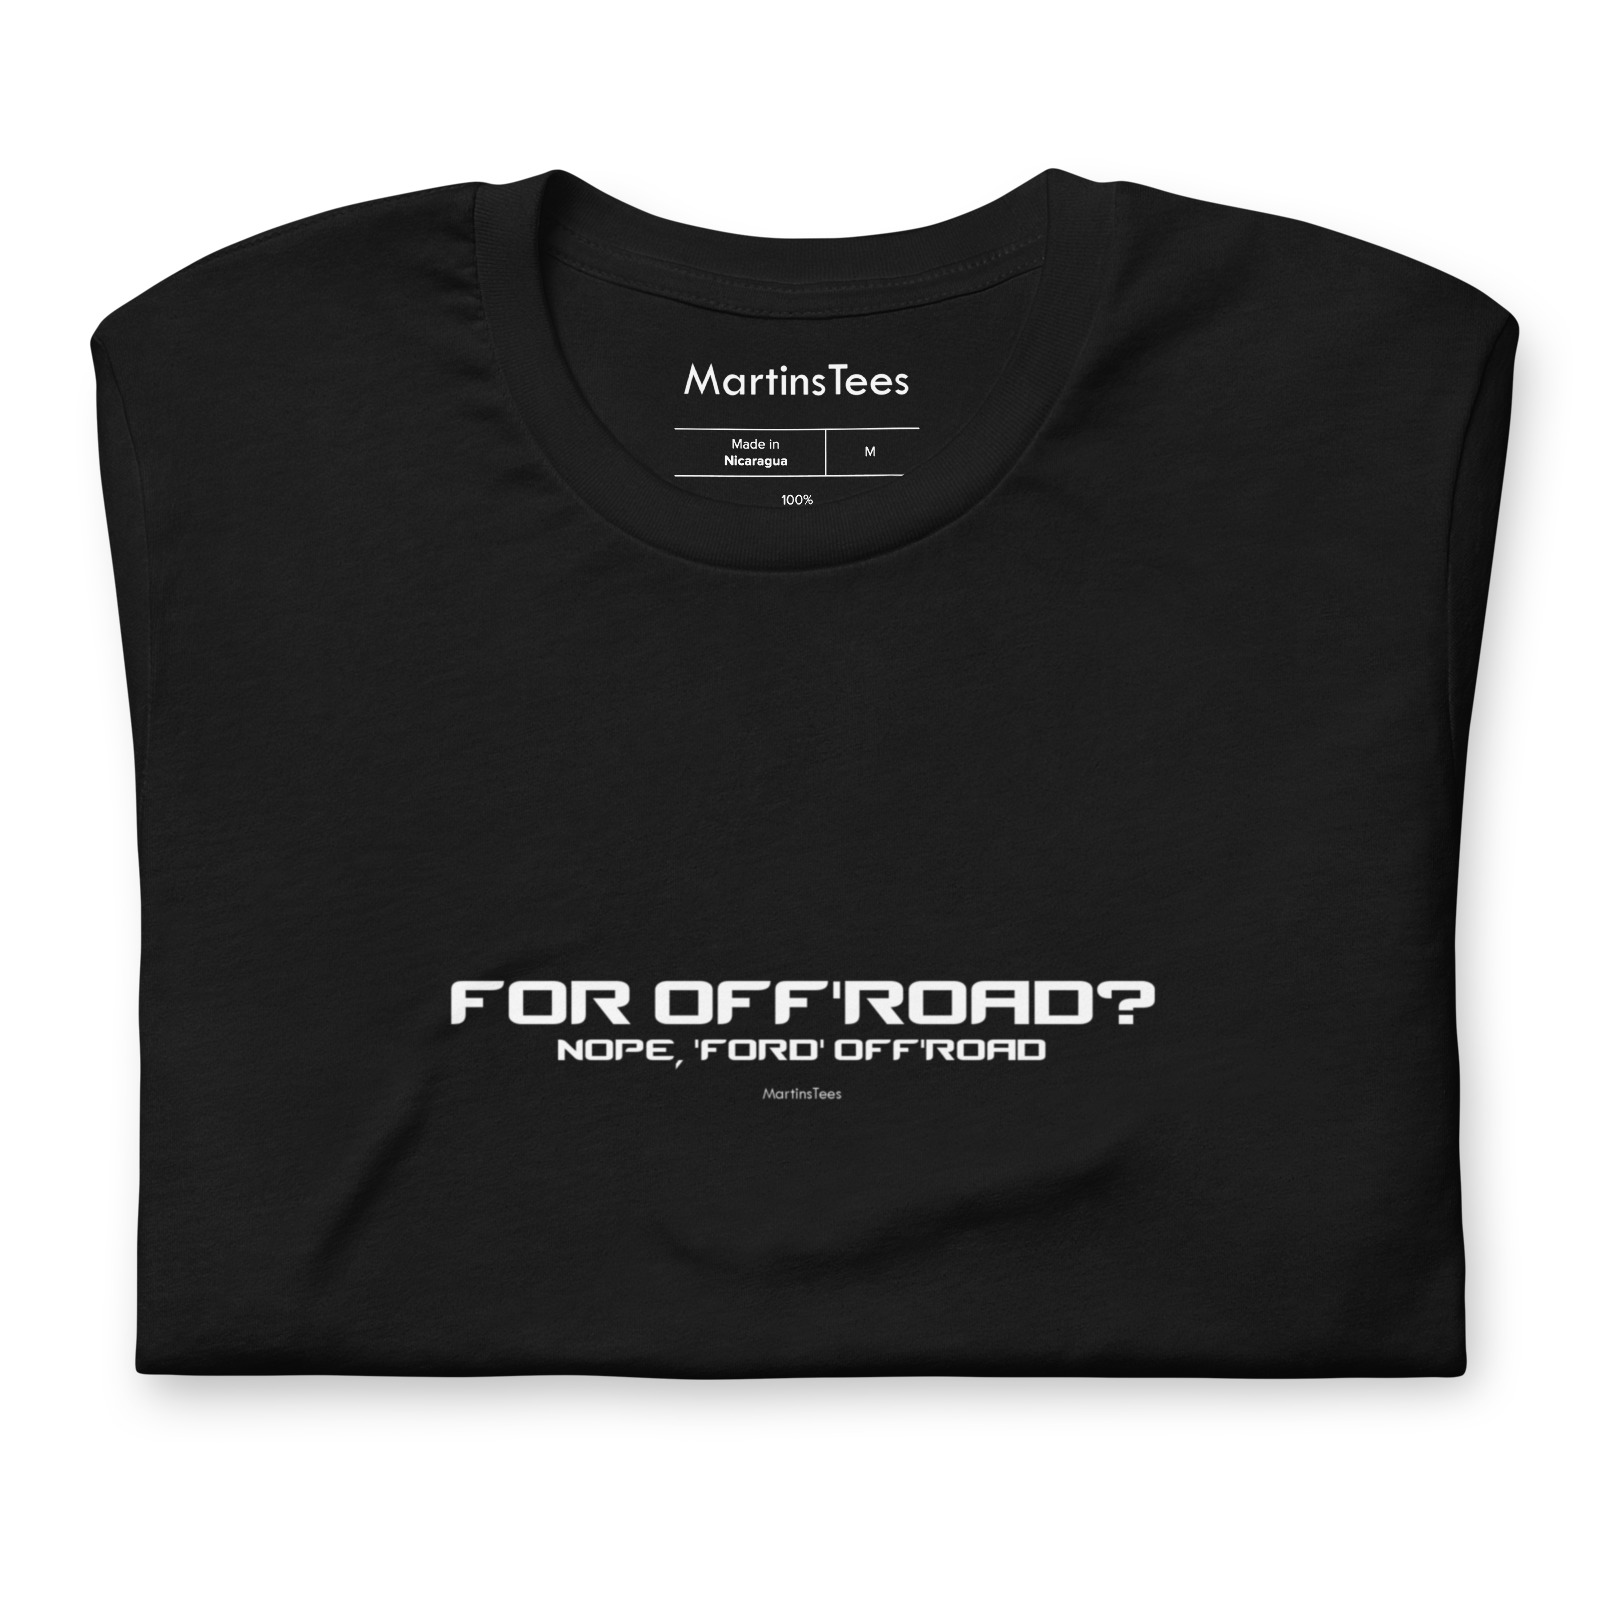 T-shirt: FOR OFF'ROAD? - NOPE, 'FORD' OFF'ROAD